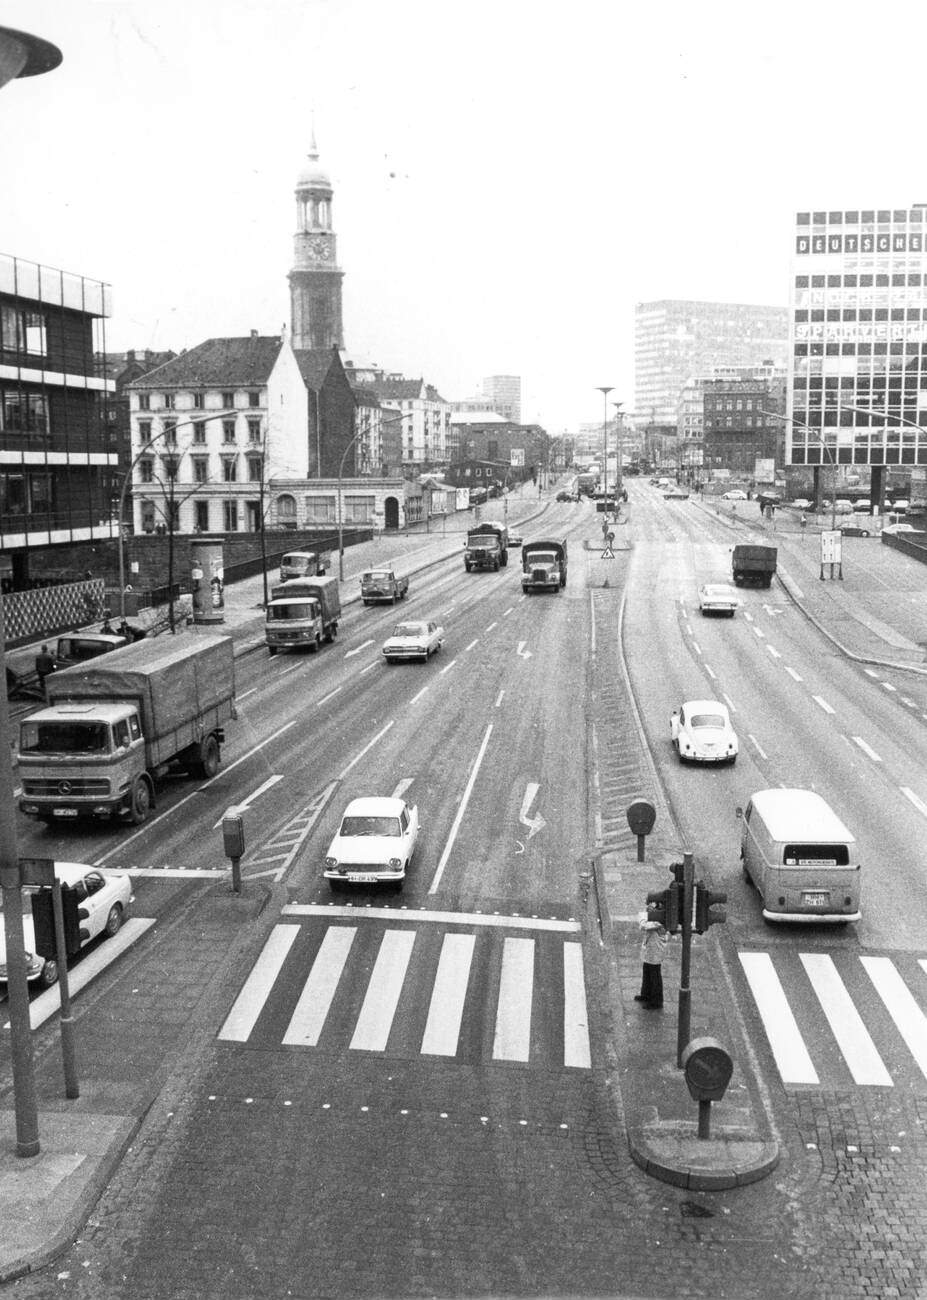 A view of Ludwig-Erhard-Strasse in Hamburg, Germany in 1970.